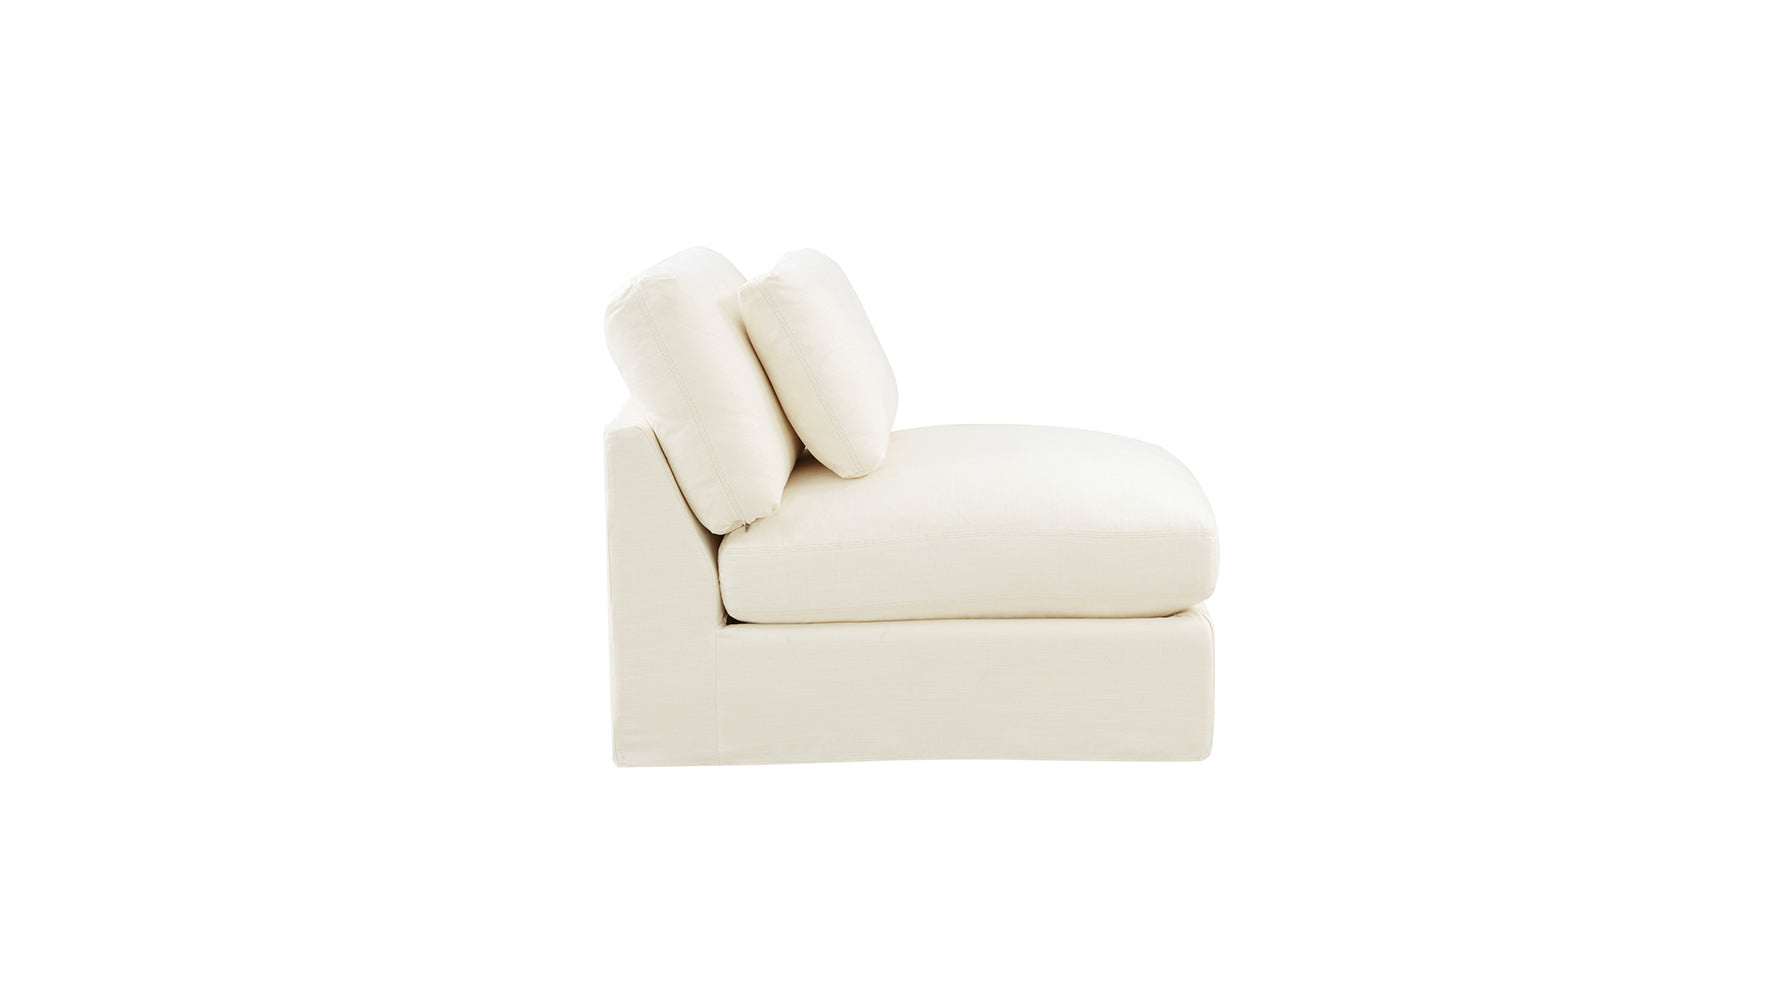 Get Together™ Armless Chair, Large, Cream Linen - Image 7